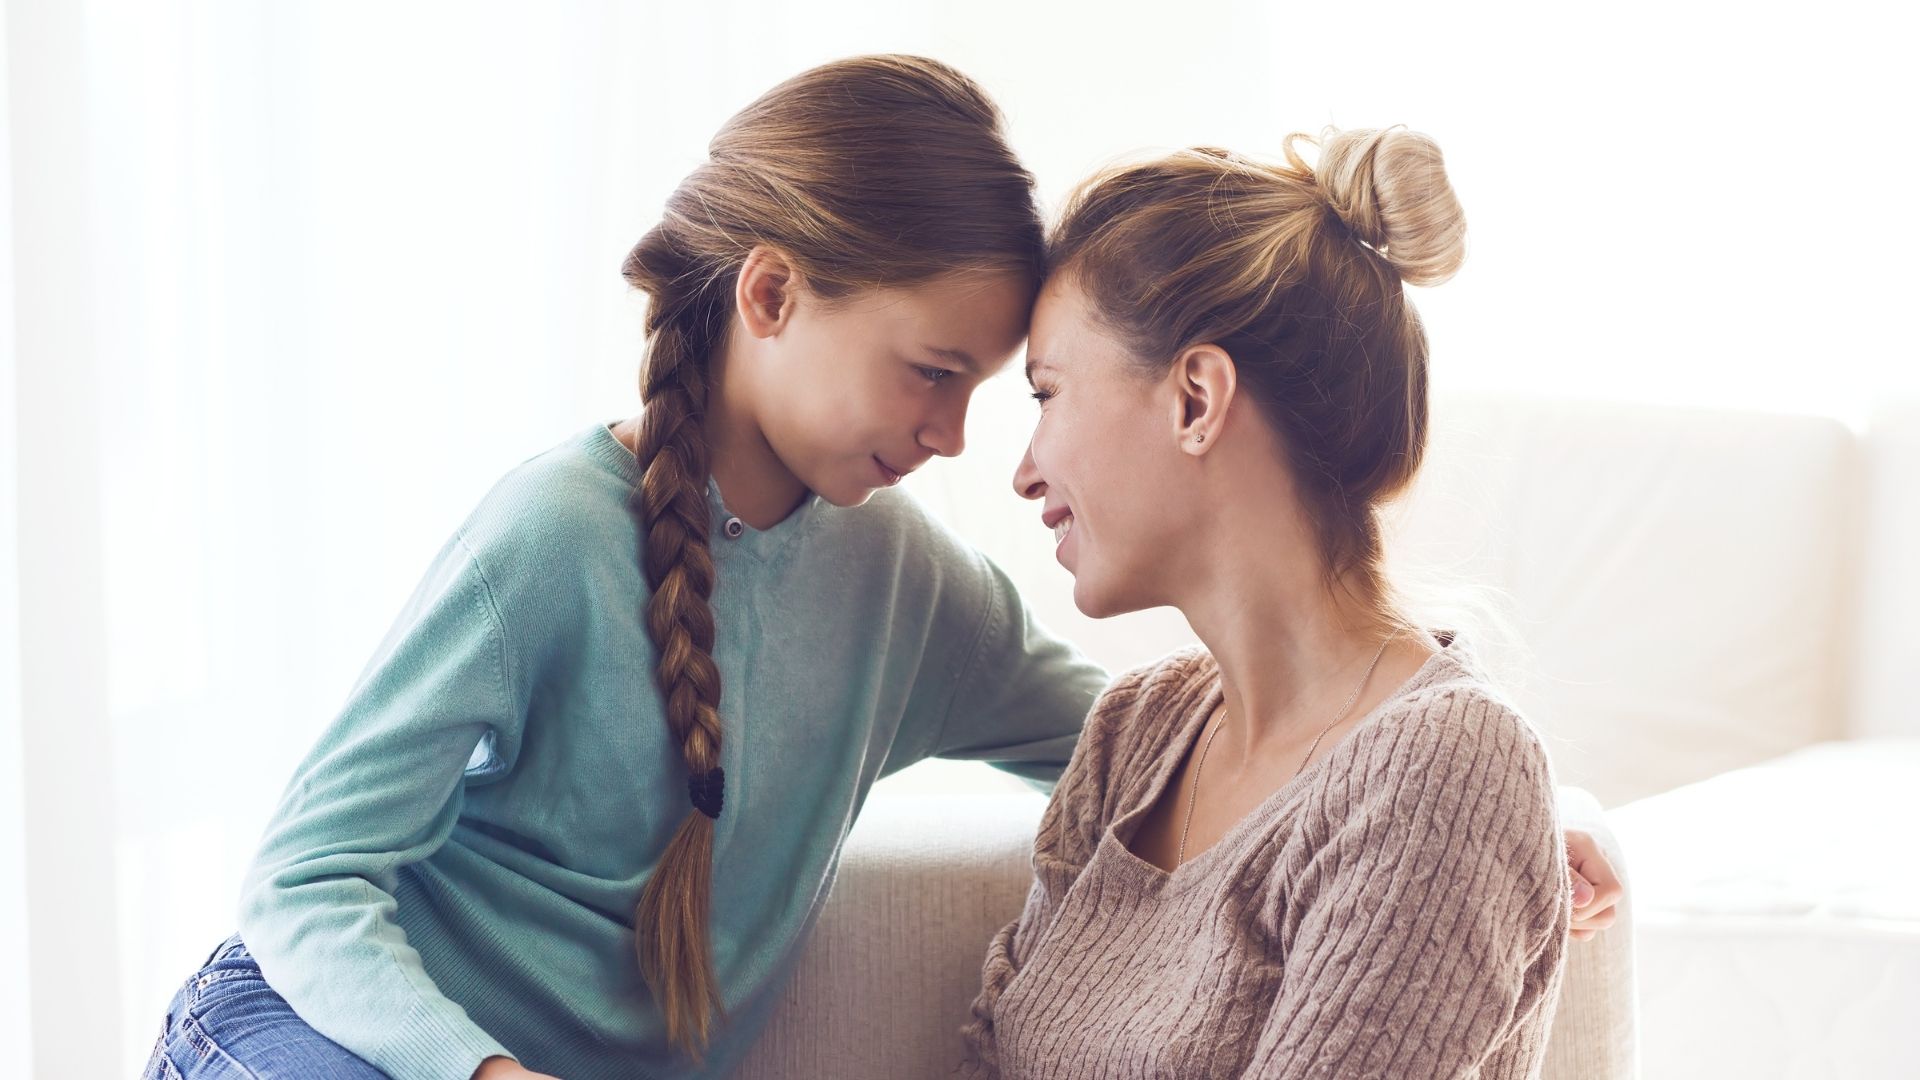 A New Relationship with Your Kids: 5 Skills for the New Year